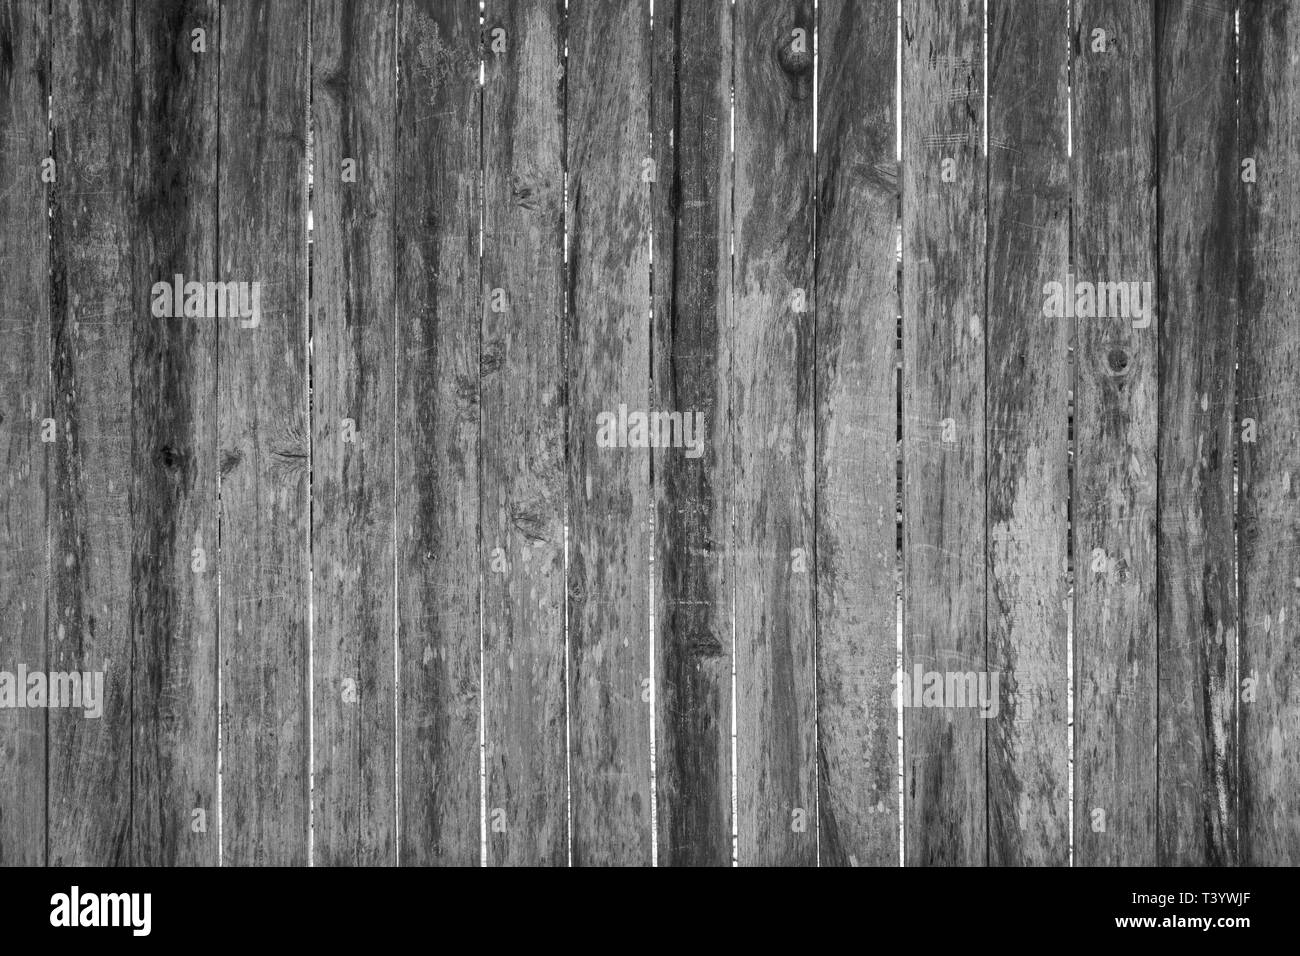 Full frame background of an old, faded and scratched wooden board wall or fence in black and white. Stock Photo